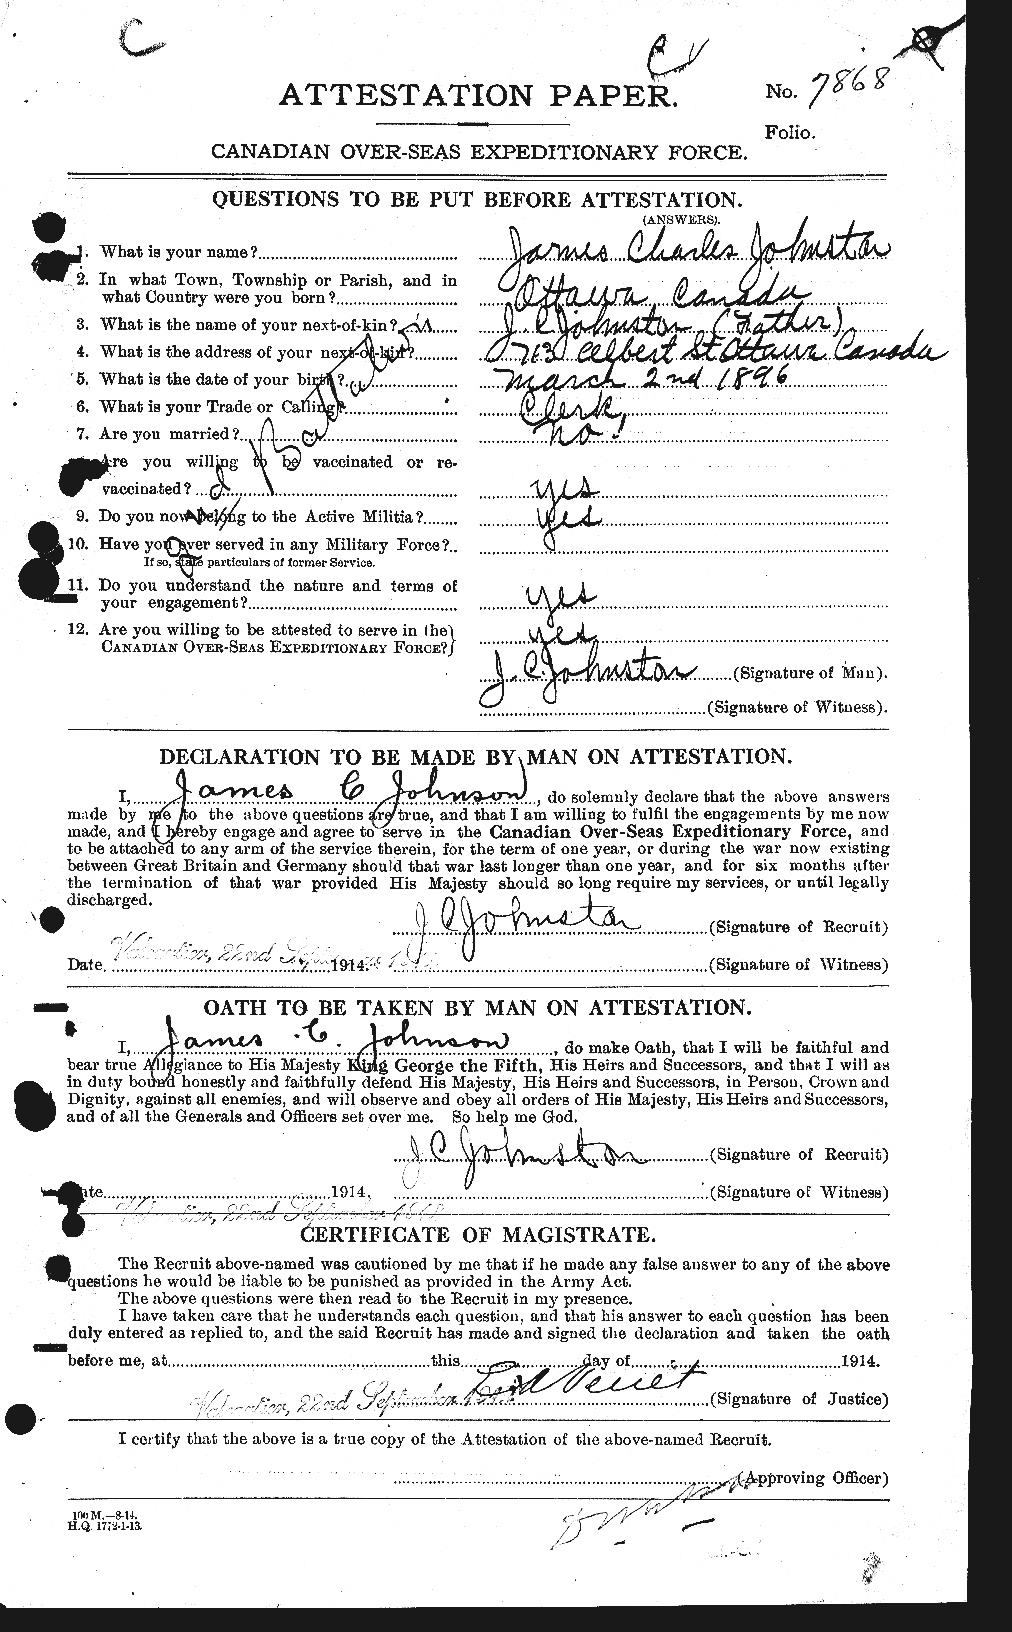 Personnel Records of the First World War - CEF 422726a